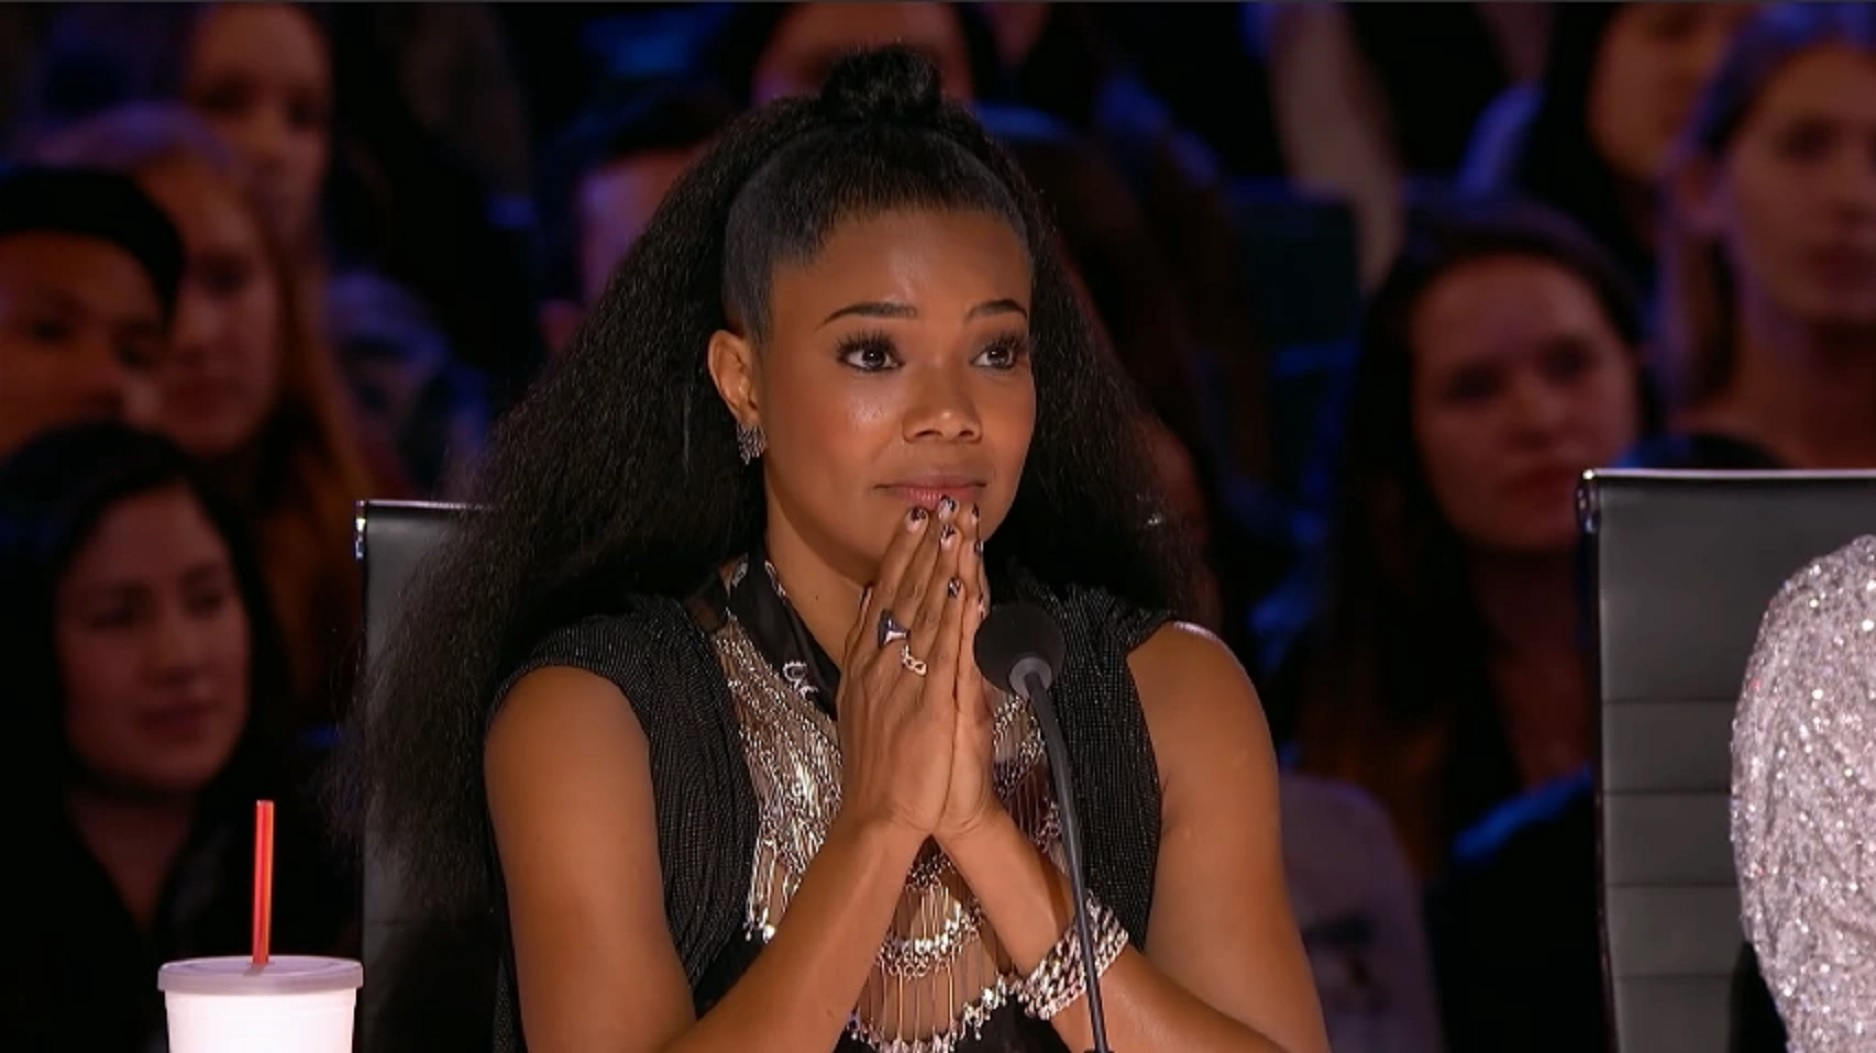 Gabrielle Union Allegedly Fired From ‘America’s Got Talent’ After Speaking Out Against Racism, Sexism